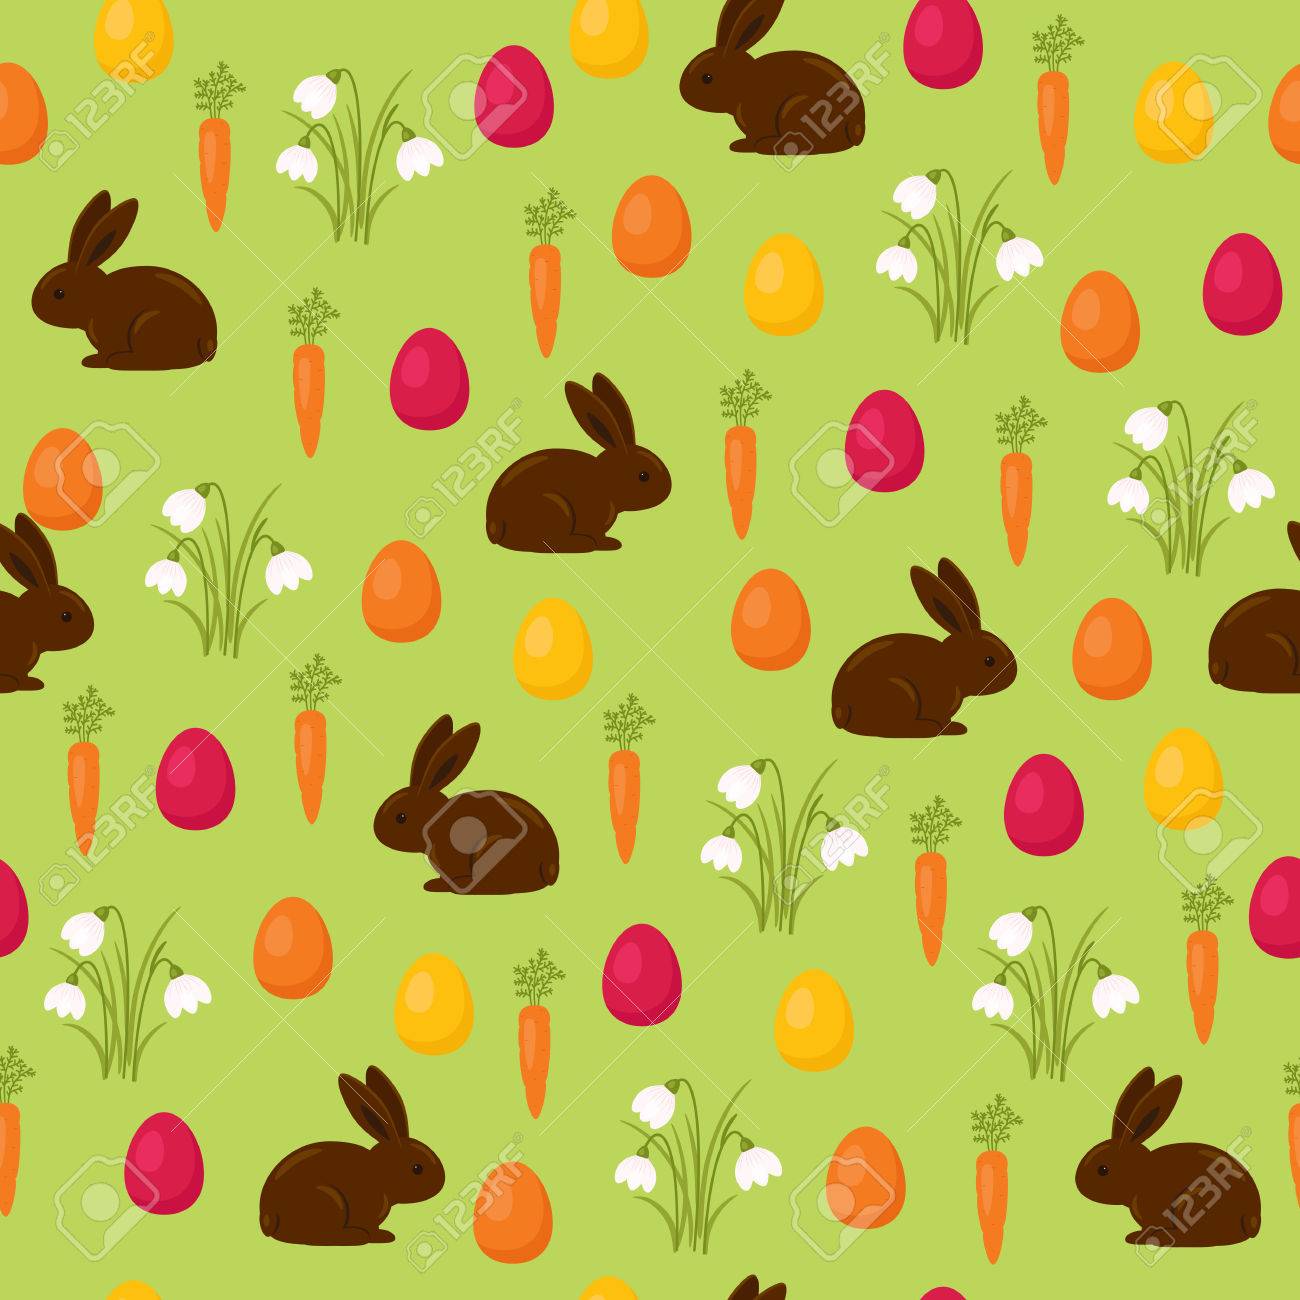 Easter Seamless Wallpaper Chocolate Bunny With Basket